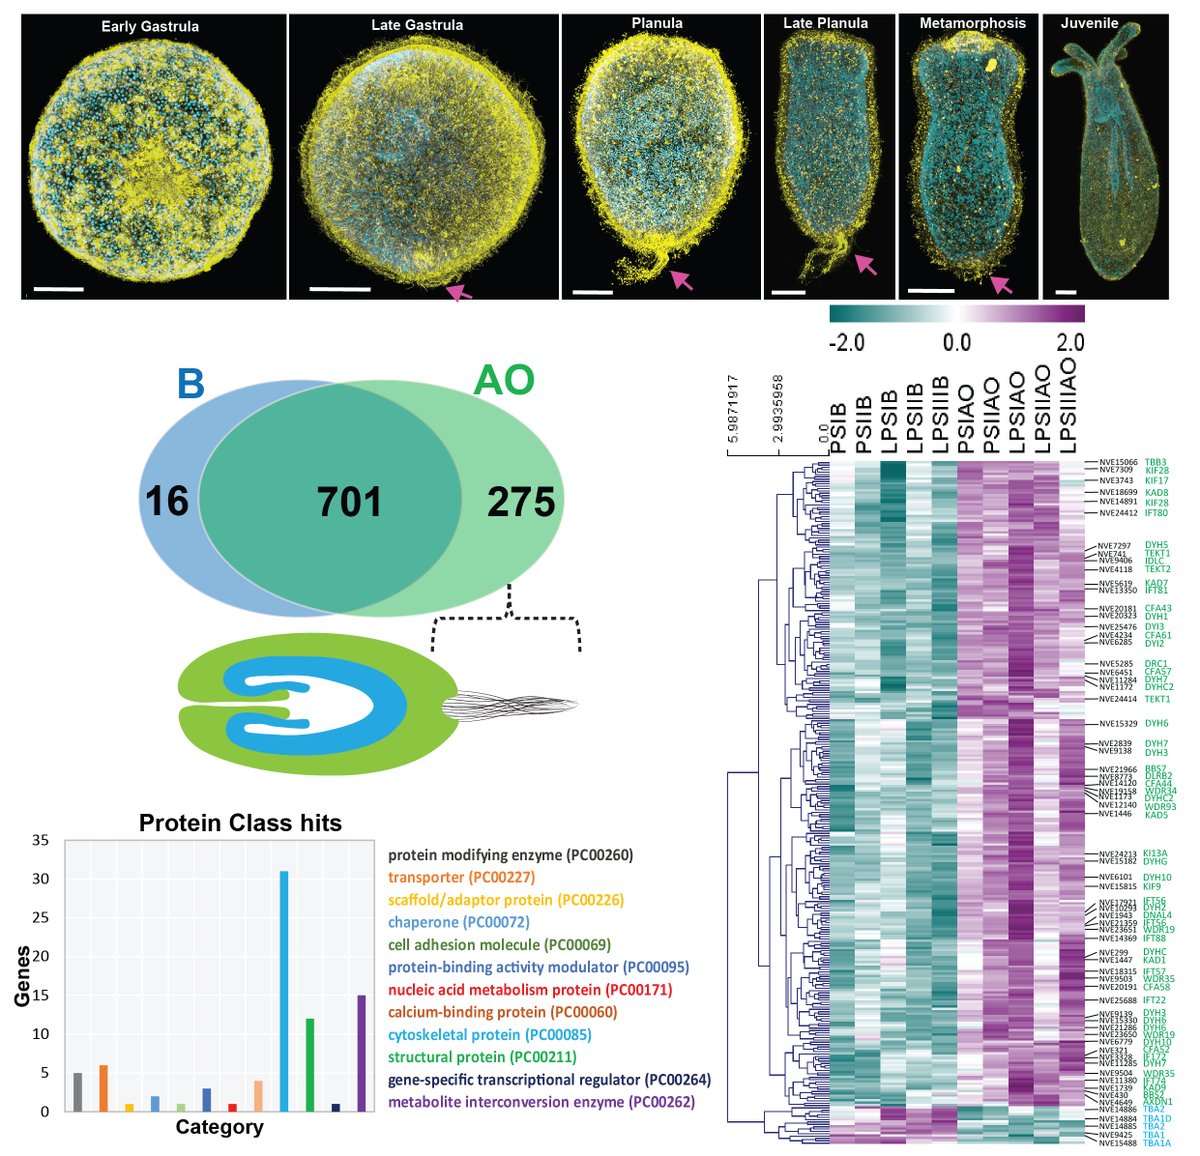 By profiling the spatial expression of neuronal genes, we showed that the apical region has a unique neuronal signature distinct from the rest of the body. Finally, we disclosed the composition of the non-motile apical tuft by combining cilia proteome with apical transcriptome.